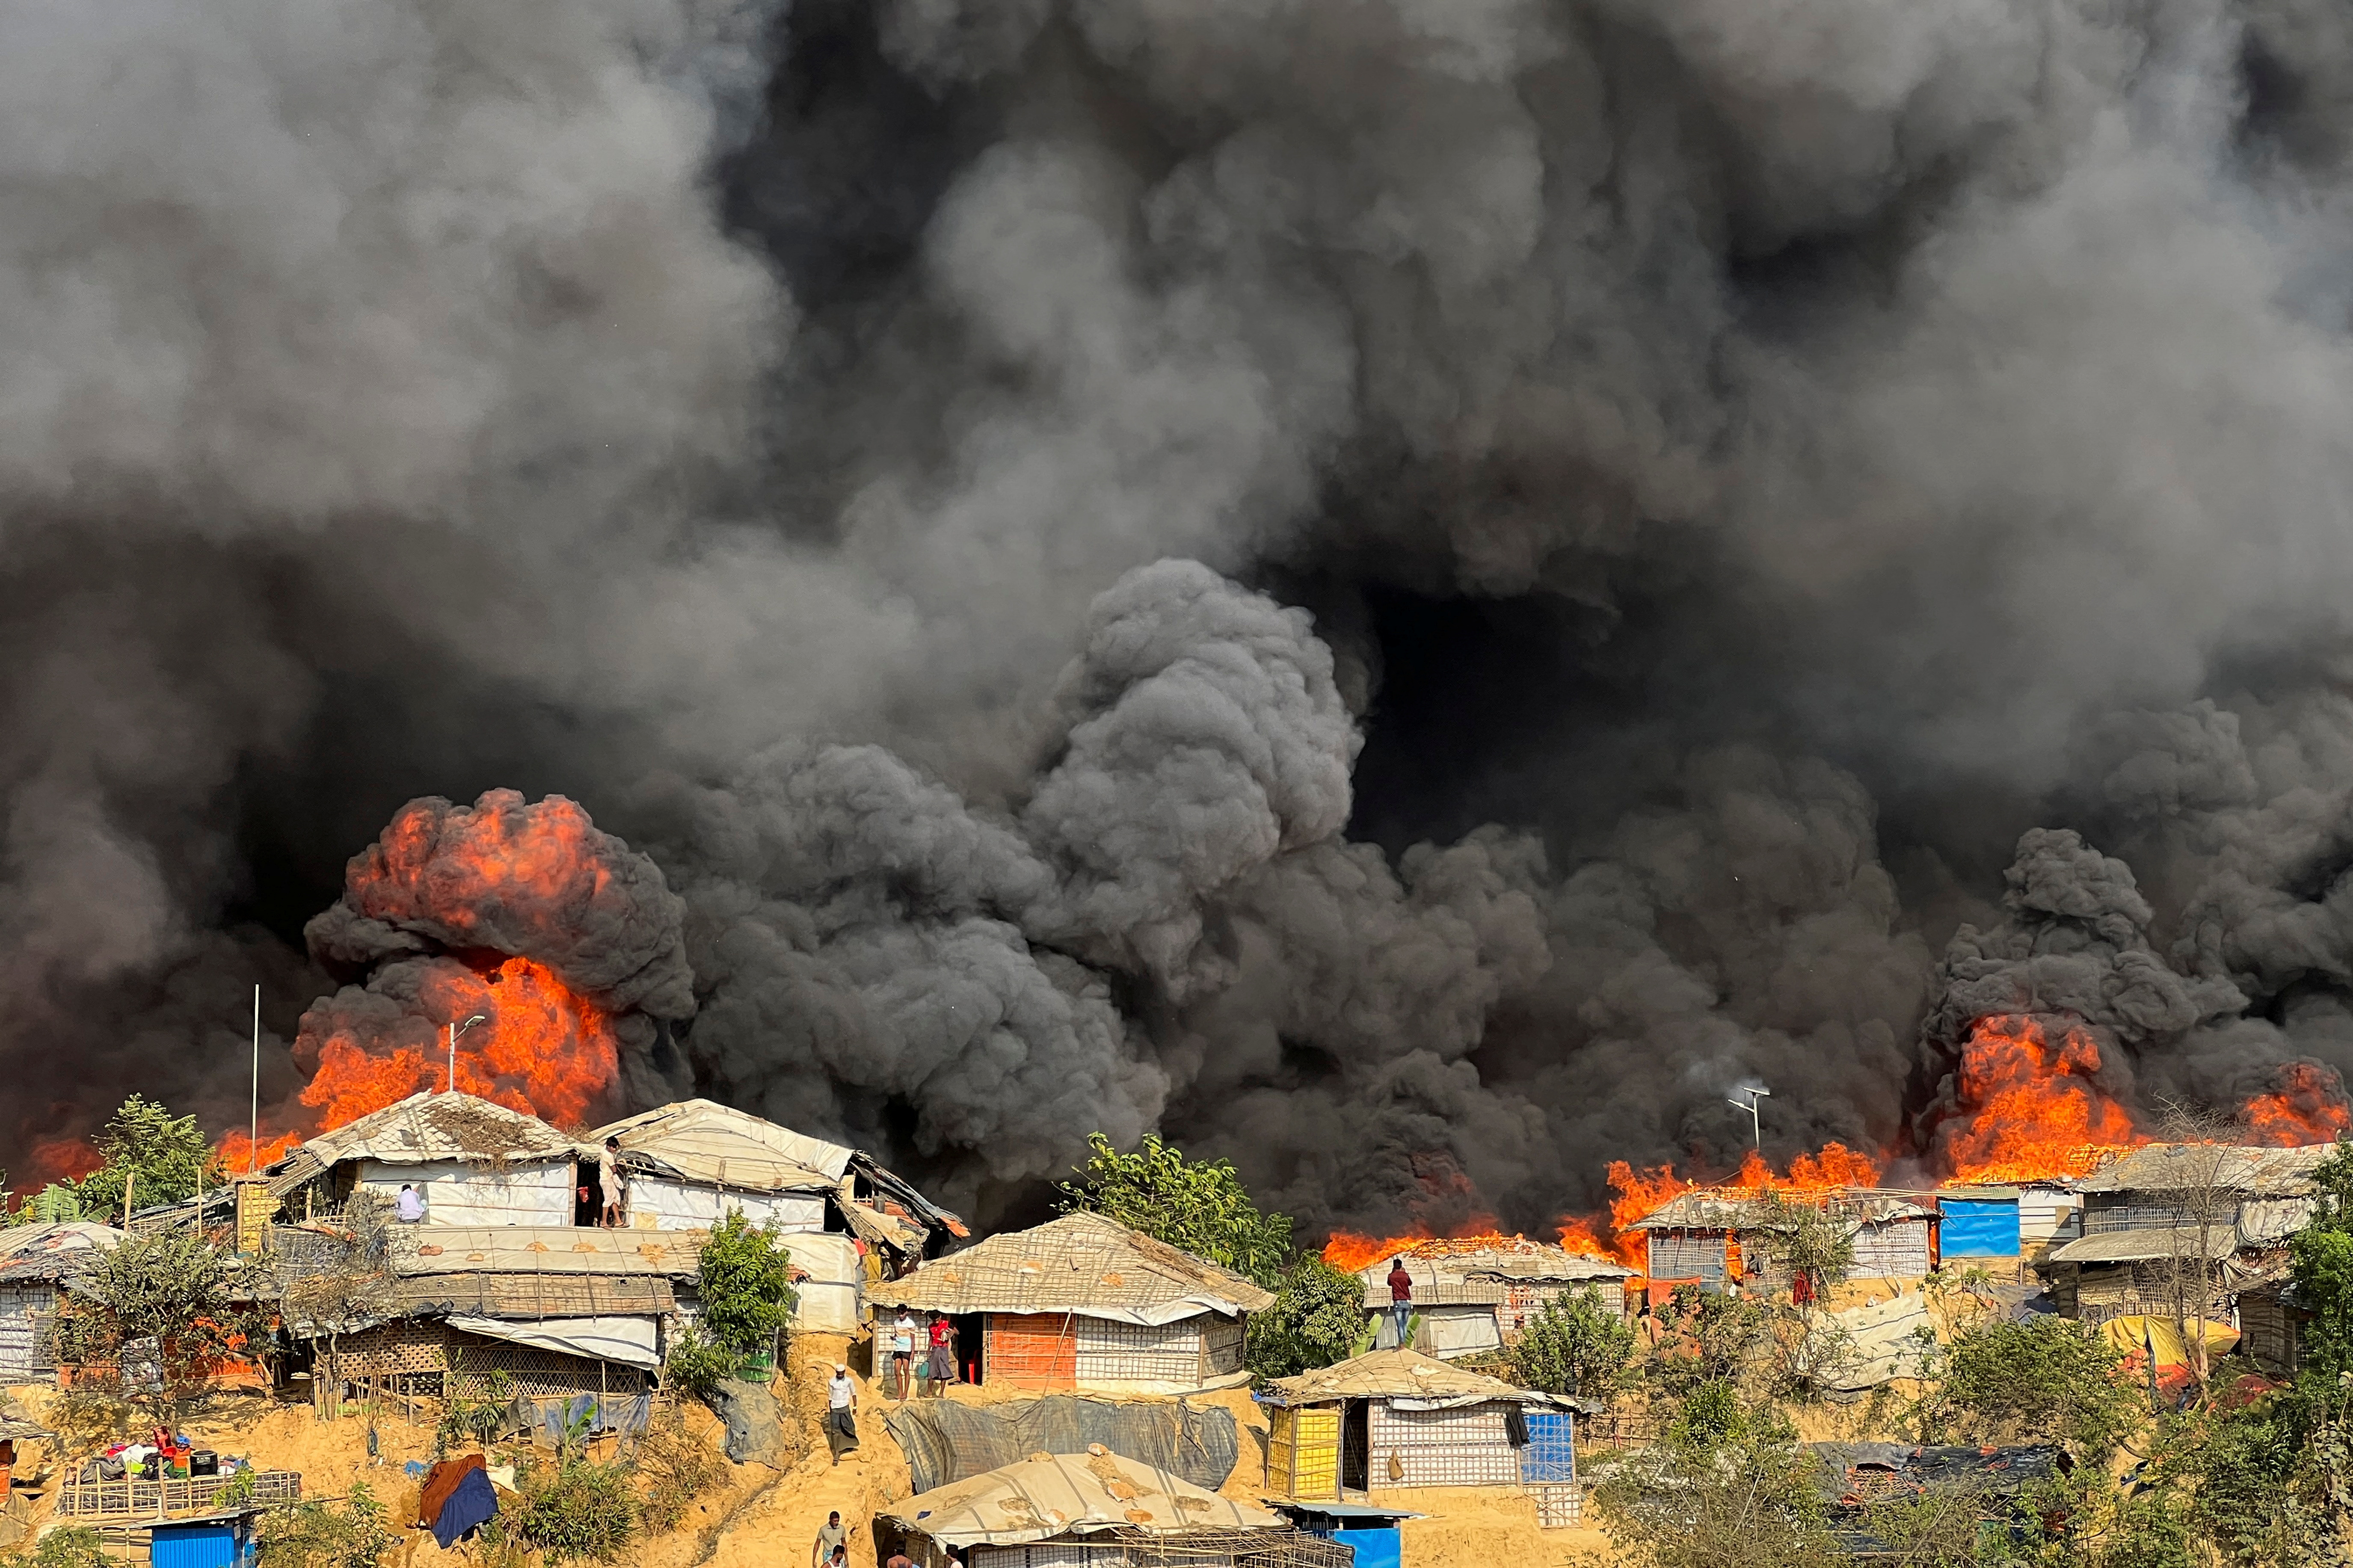 A fire breaks out in the Rohingya refugee camp in Balukhali in Cox's Bazar